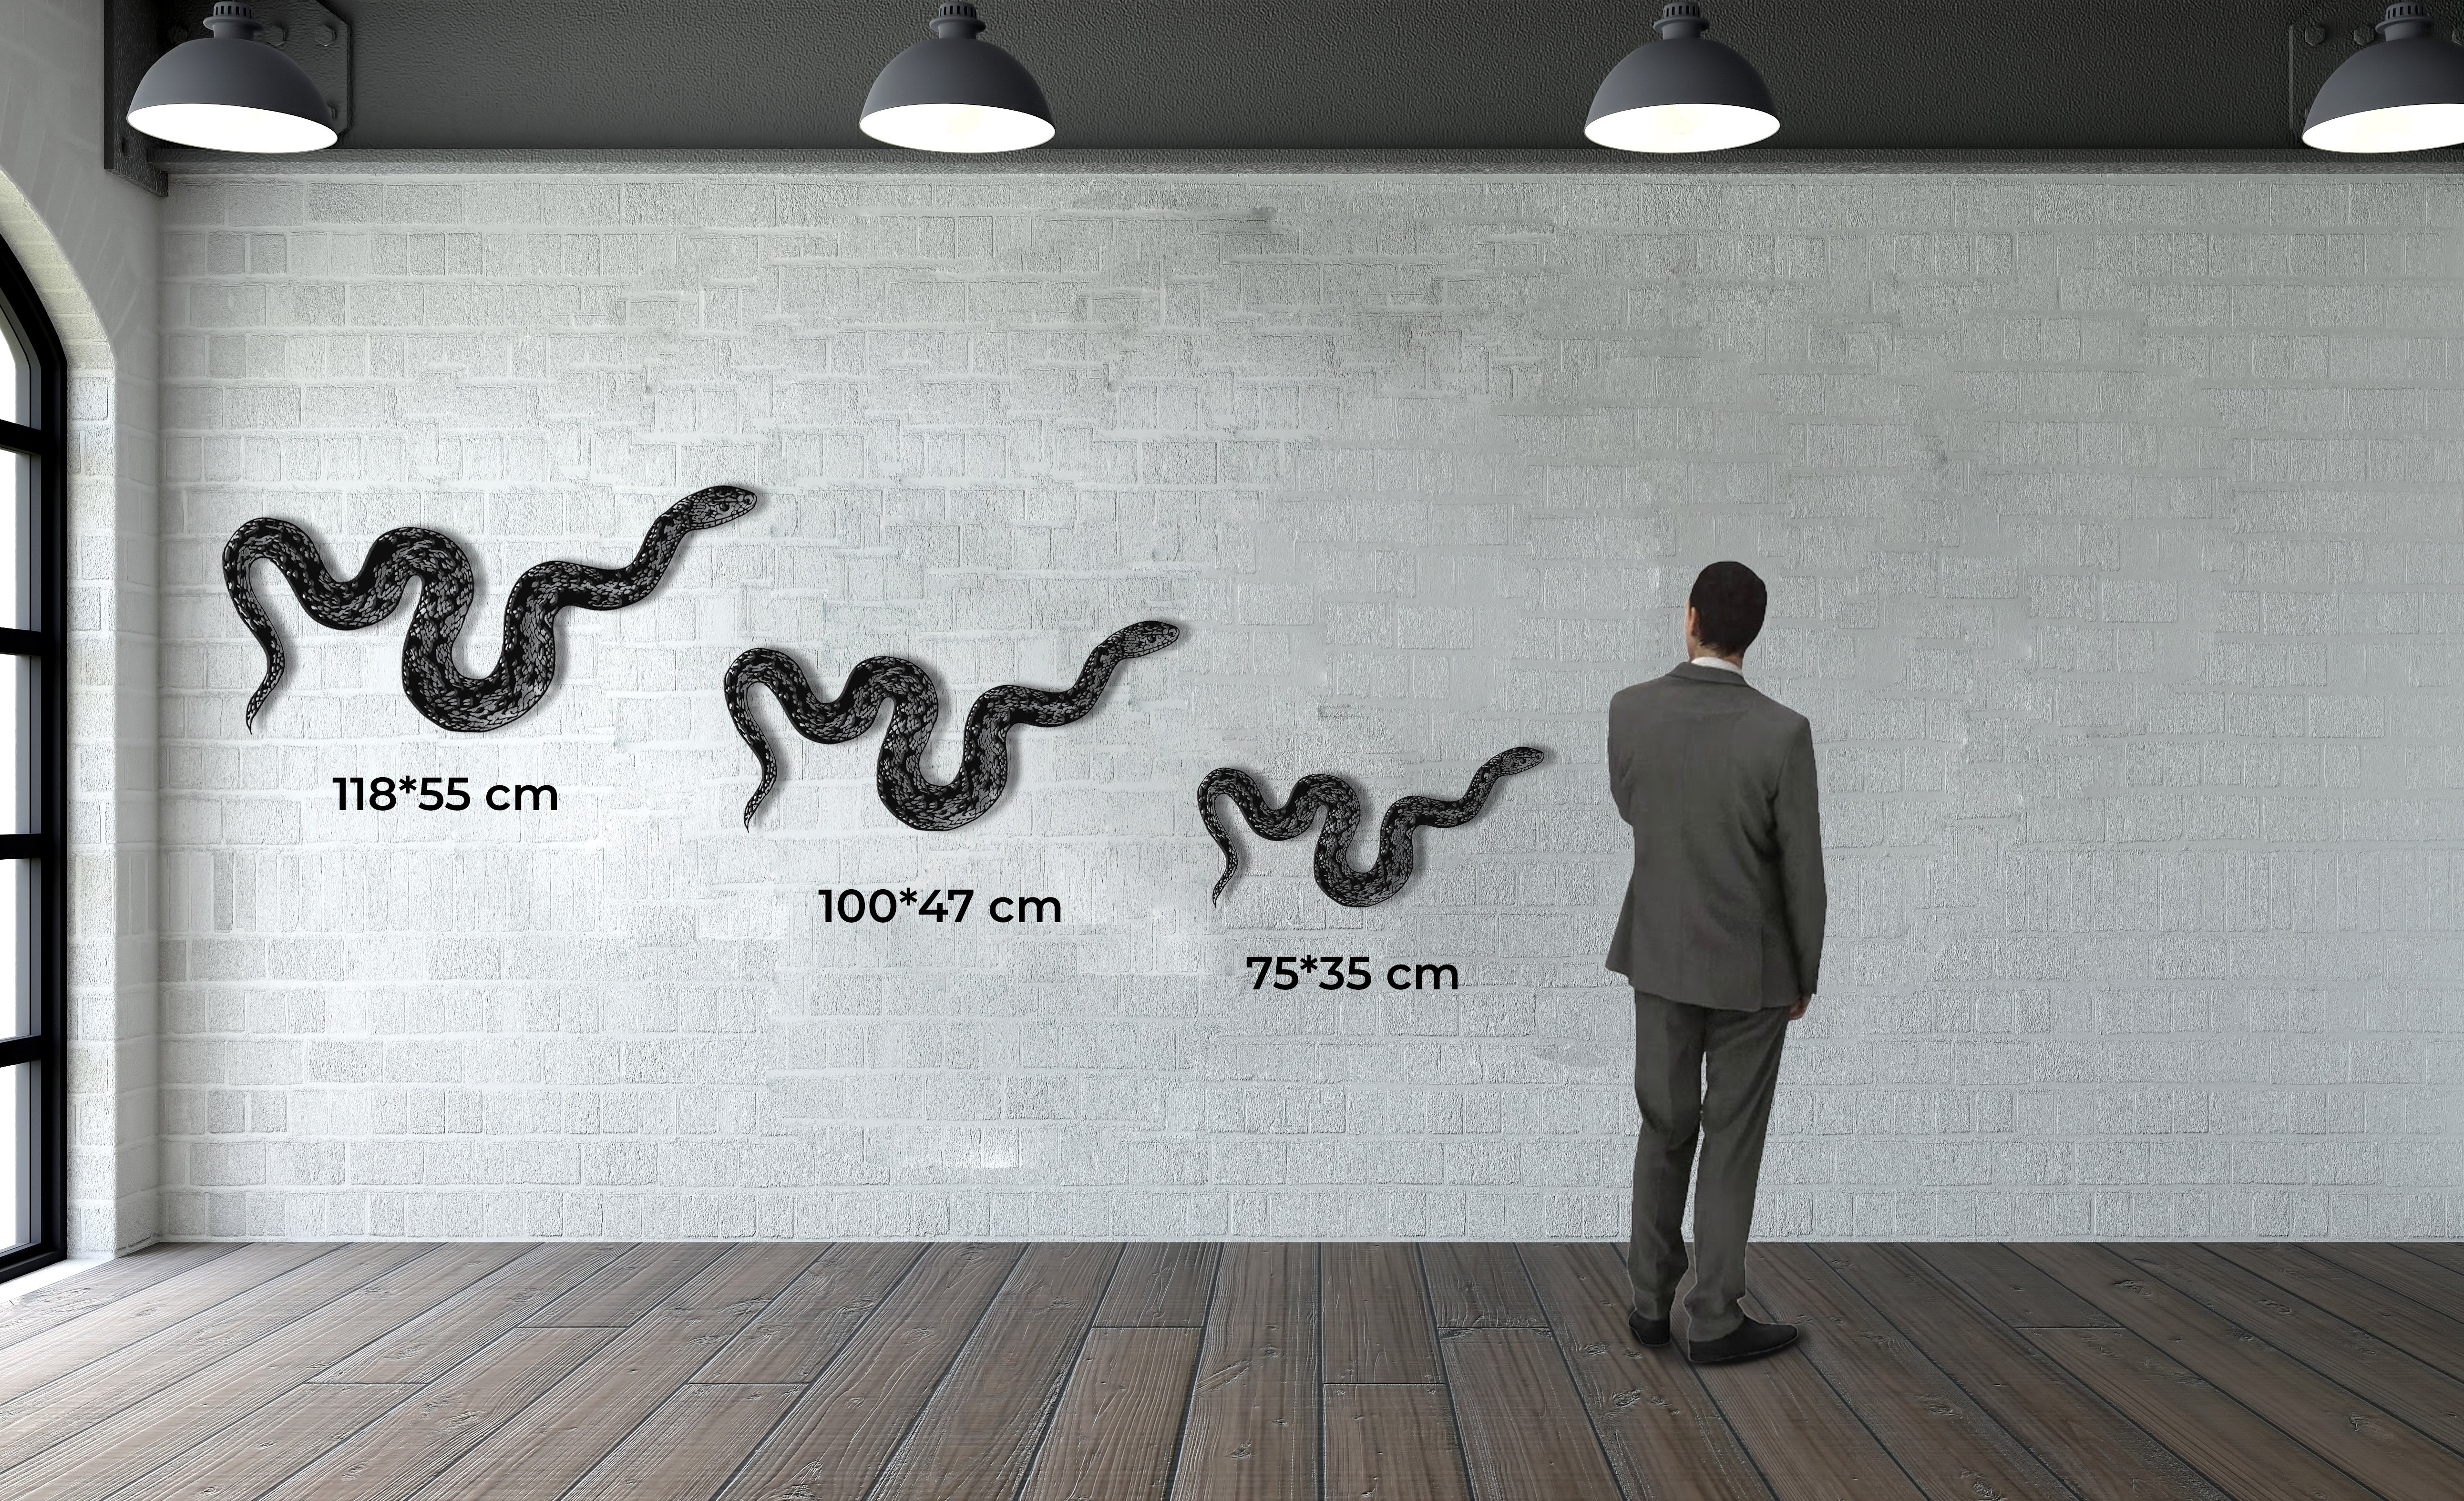 Snake Metal Wall Decor Comes In 3 Sizes